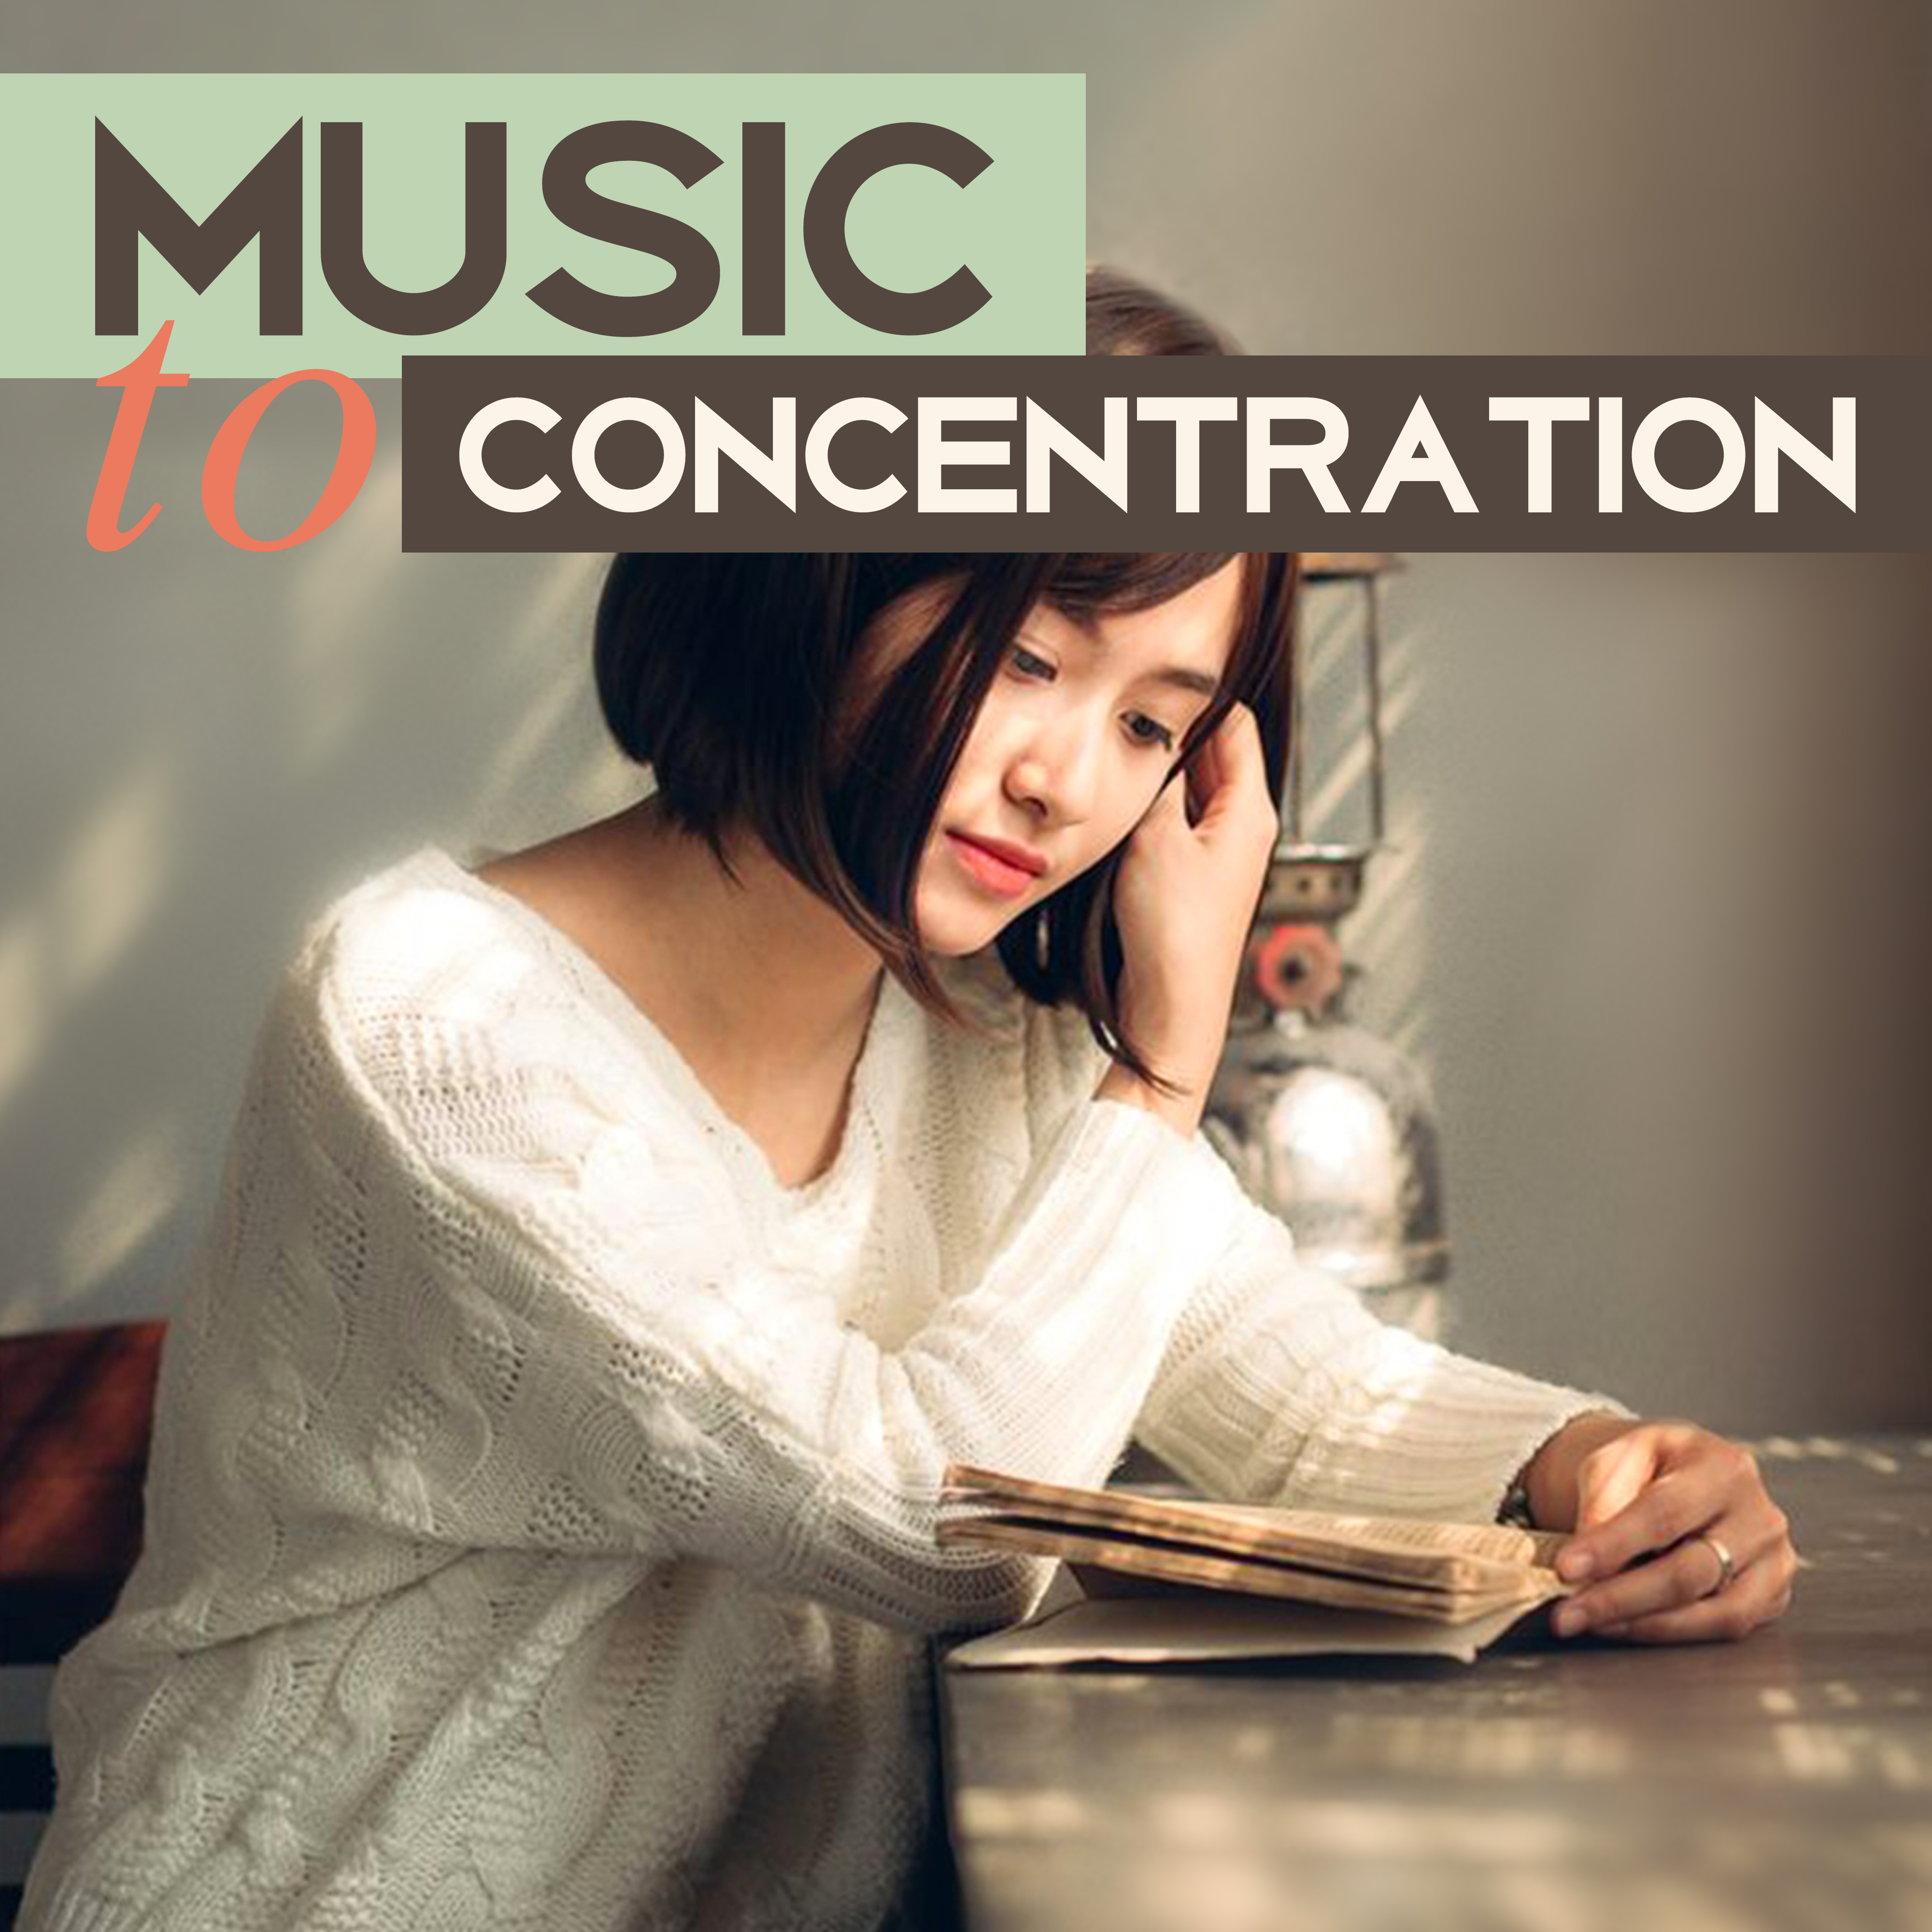 Music to Concentration  Brain Power, Study Music, Easier Learning, Good Memory on Exam, Deep Focus